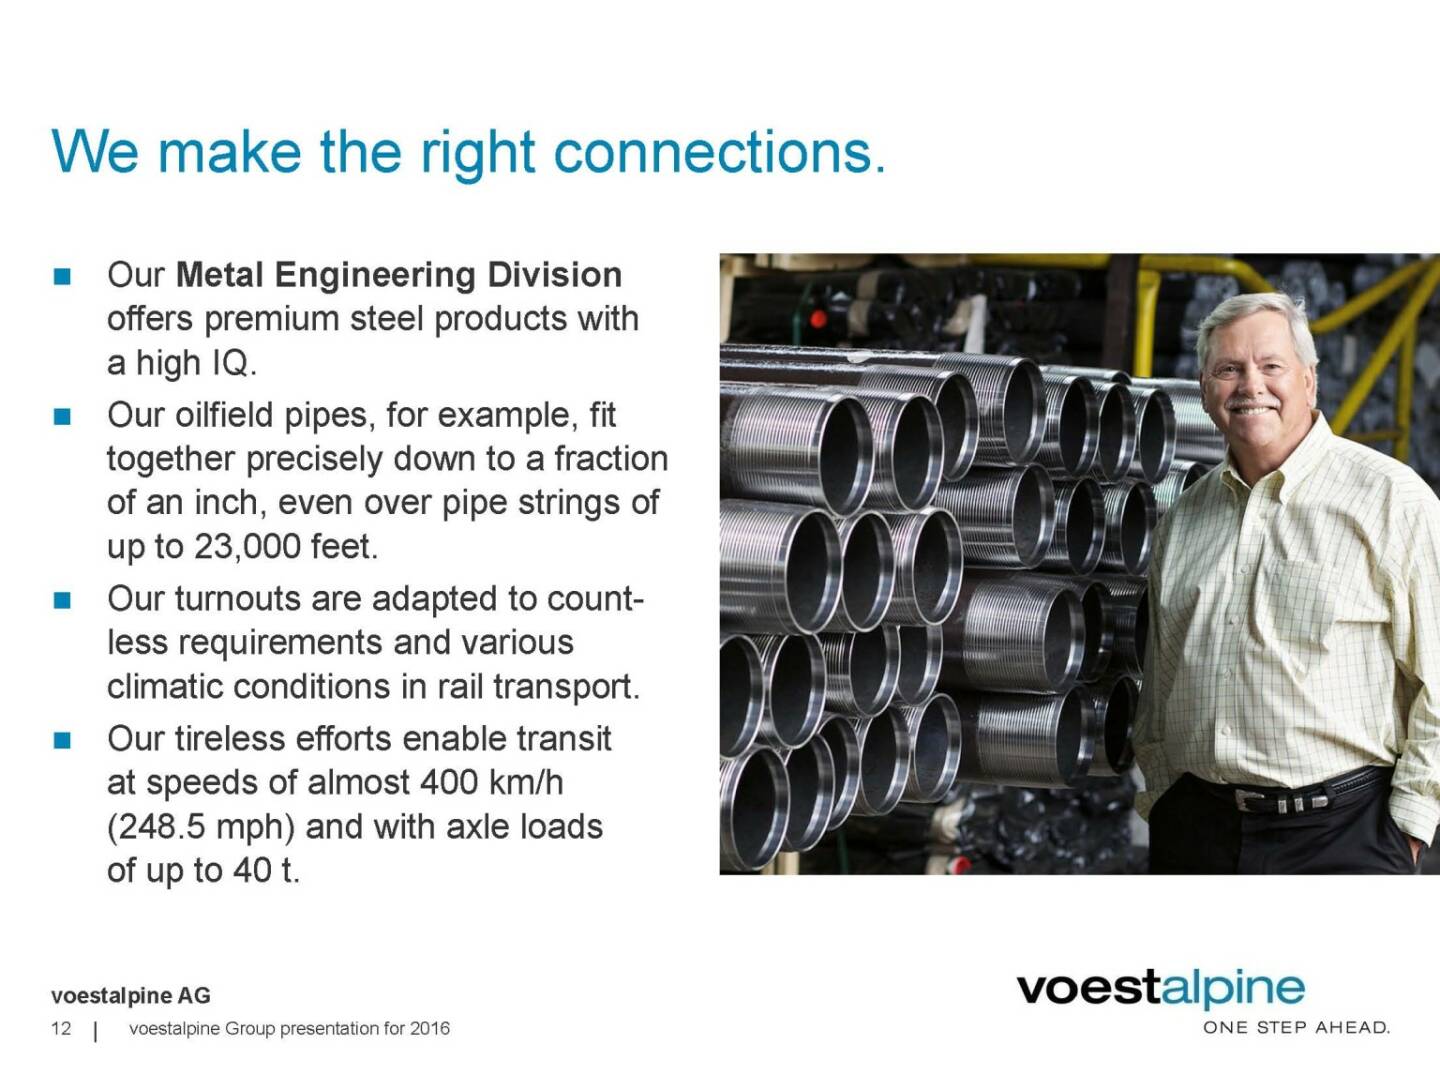 voestalpine - We make the right connections